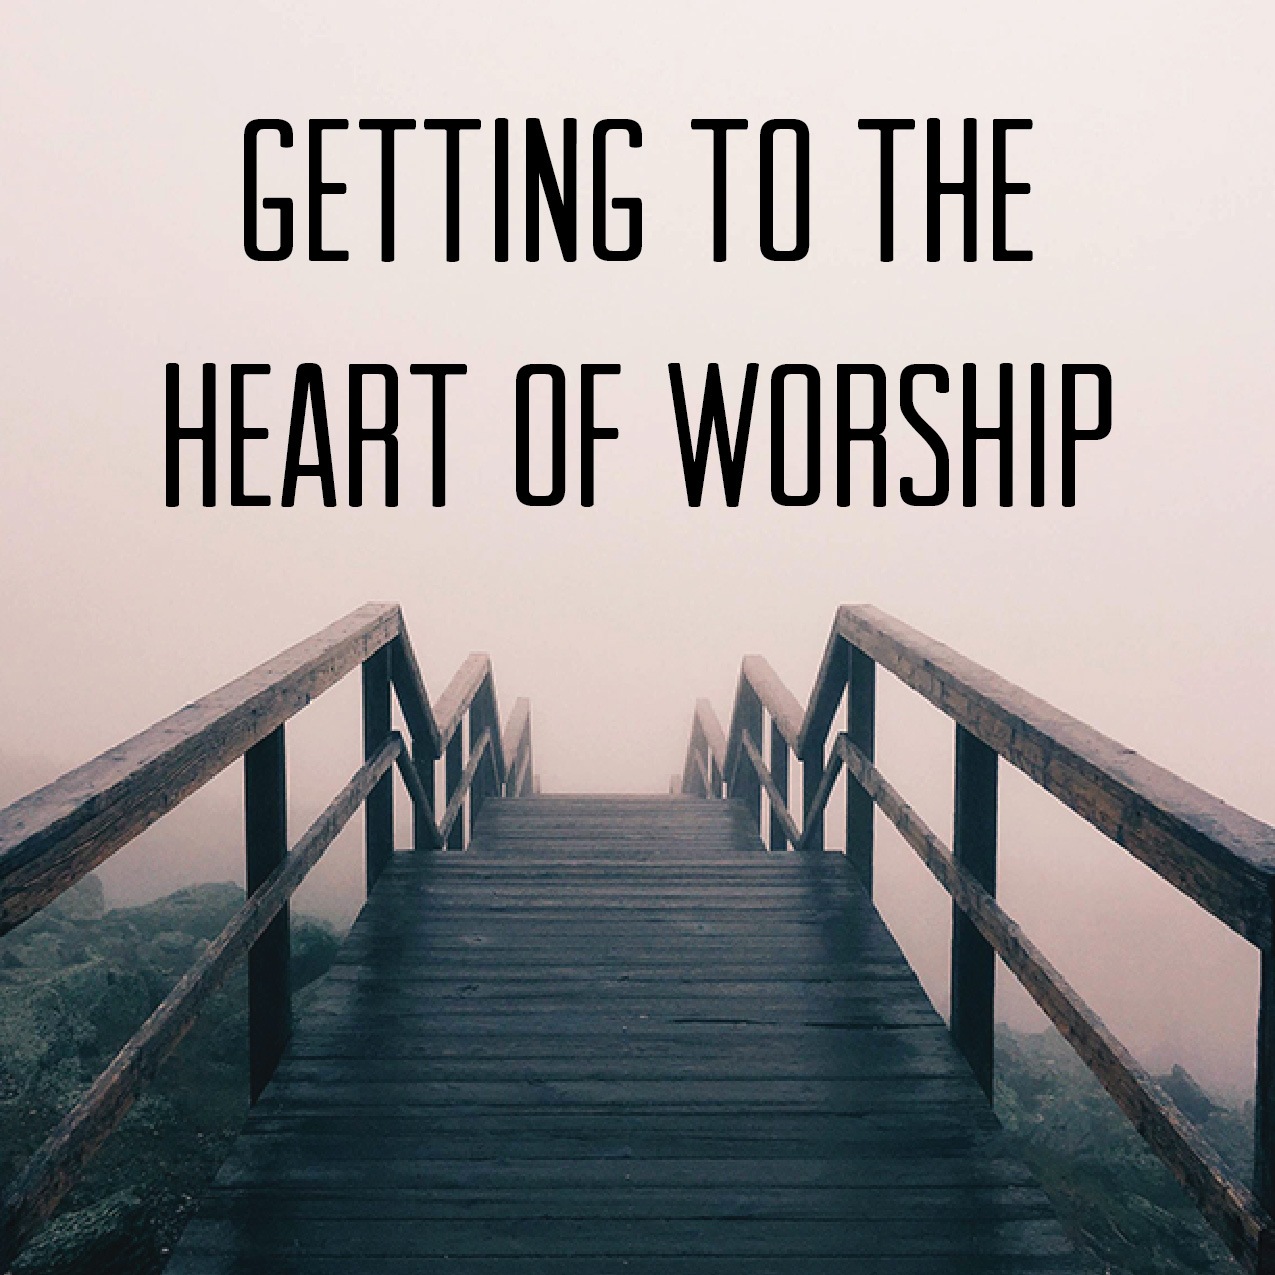 Getting to the Heart of Worship